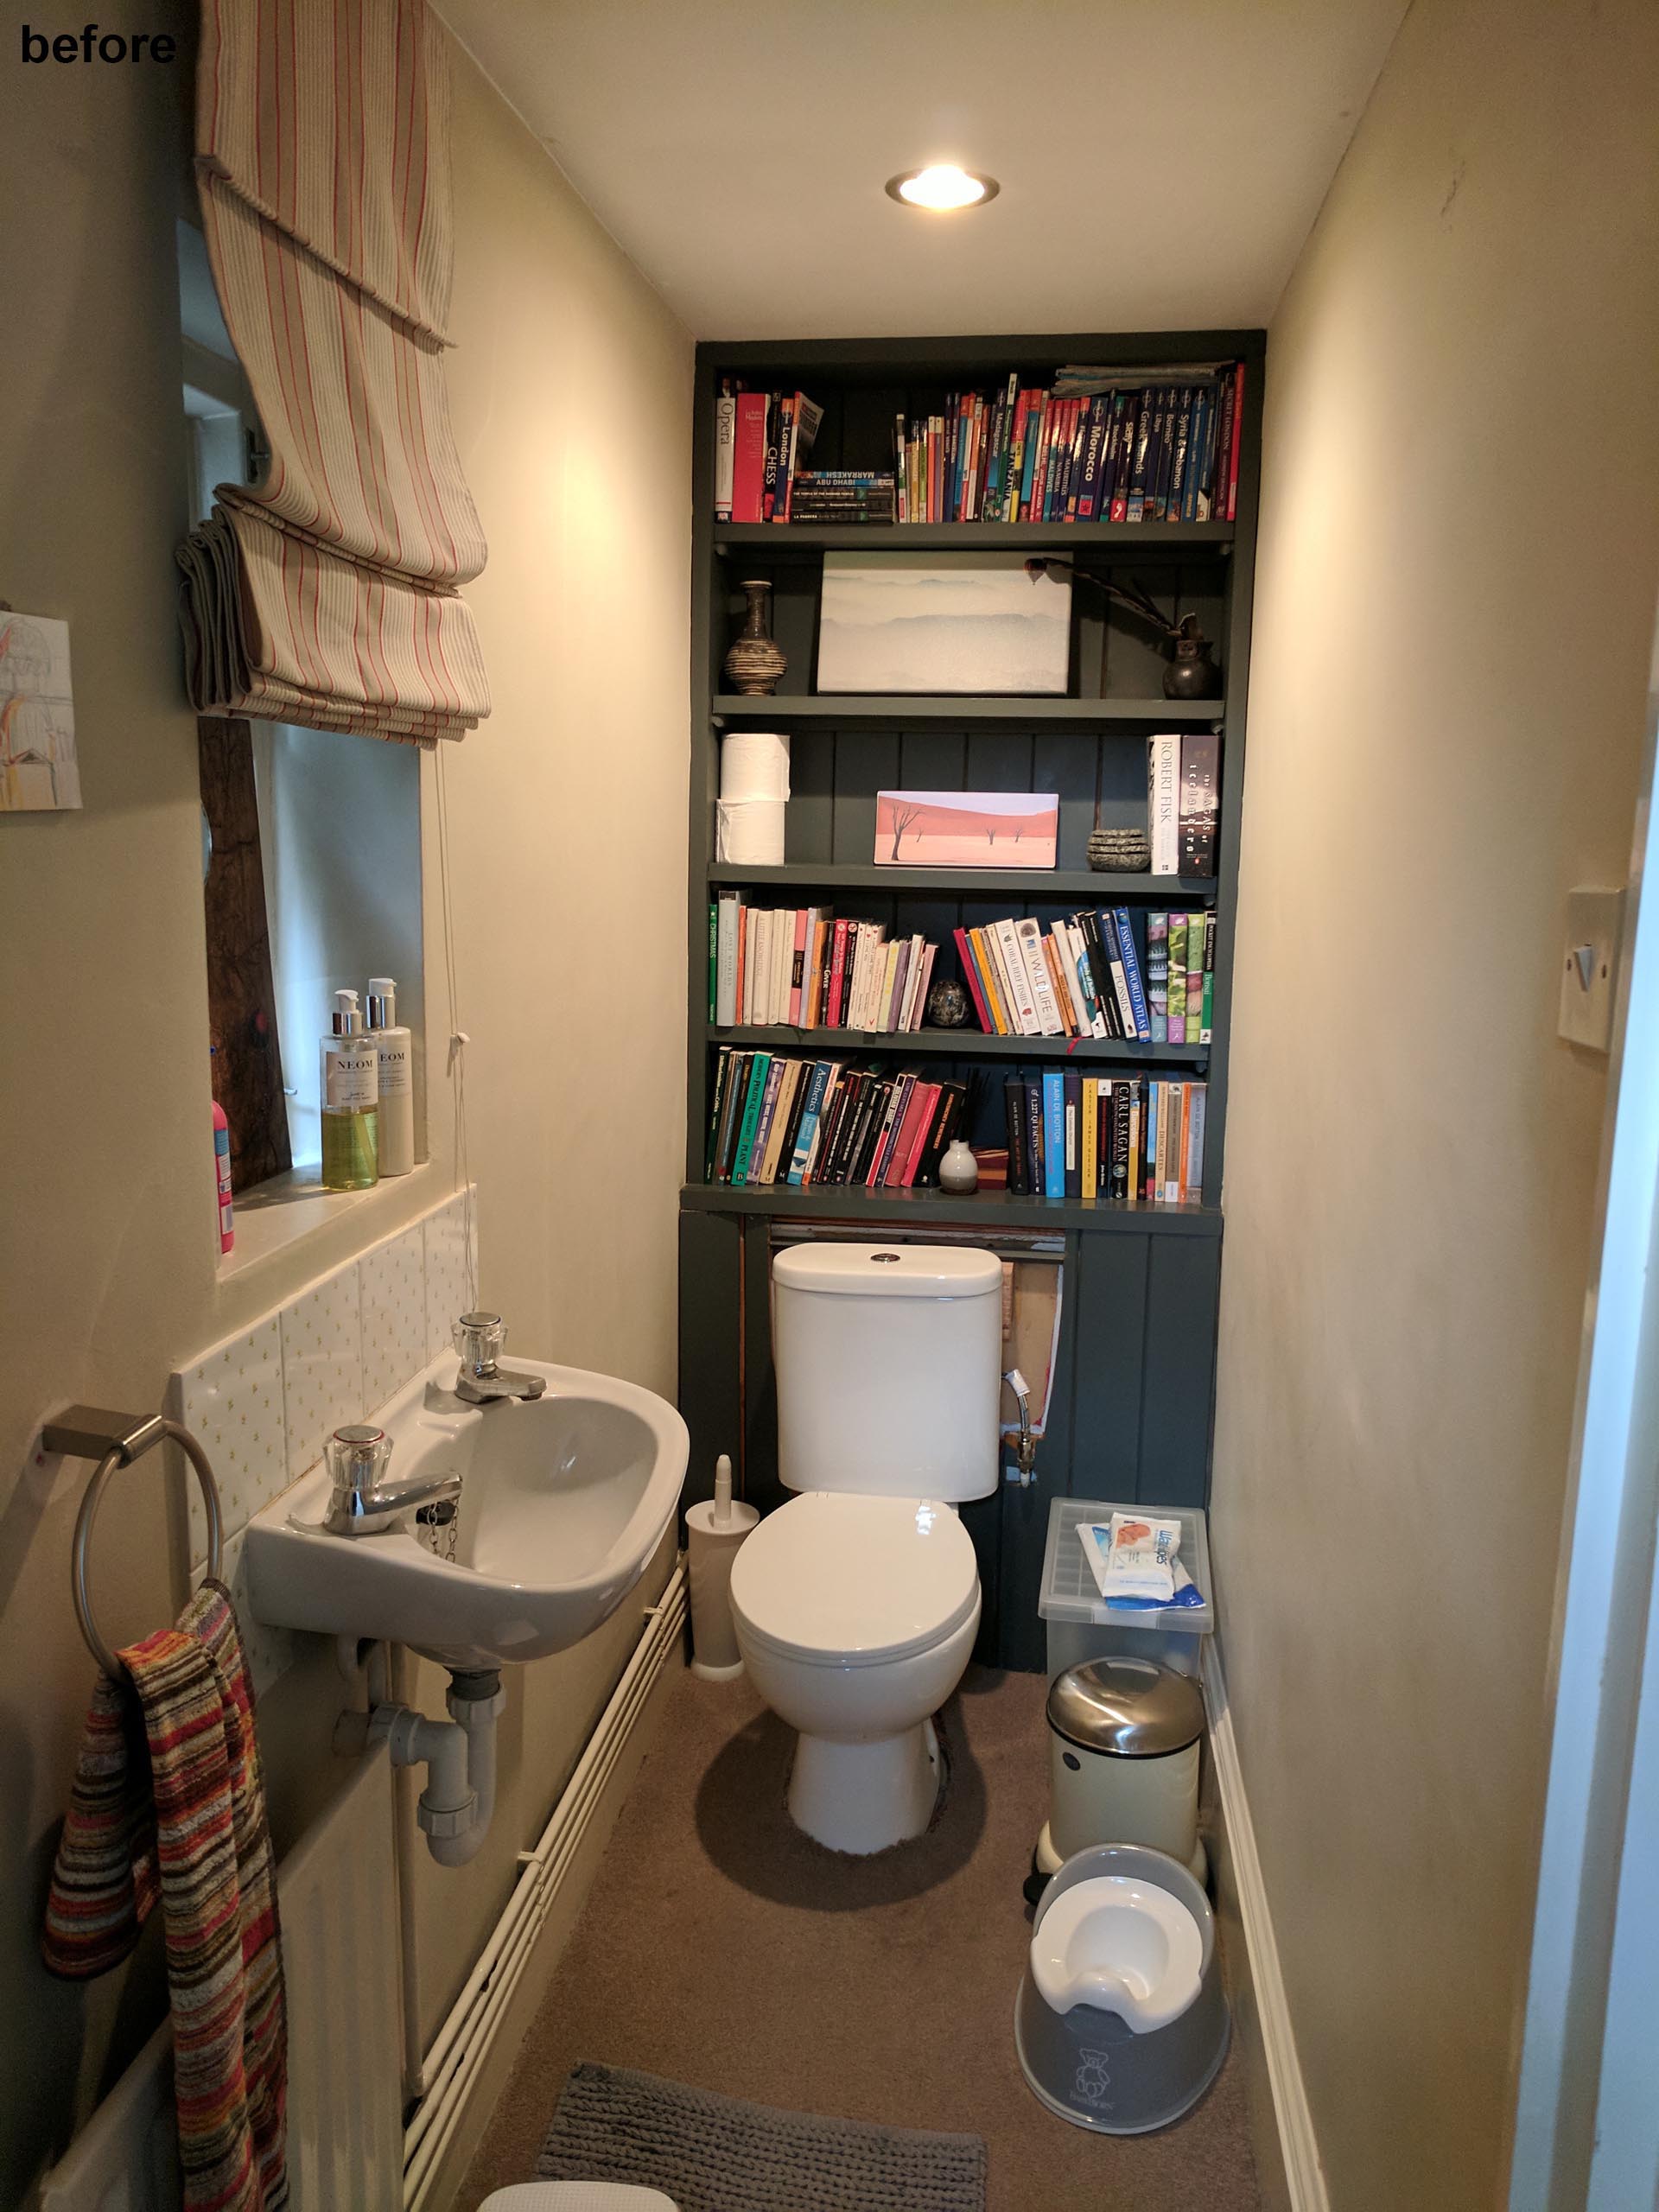 Before photo - A cluttered powder room.